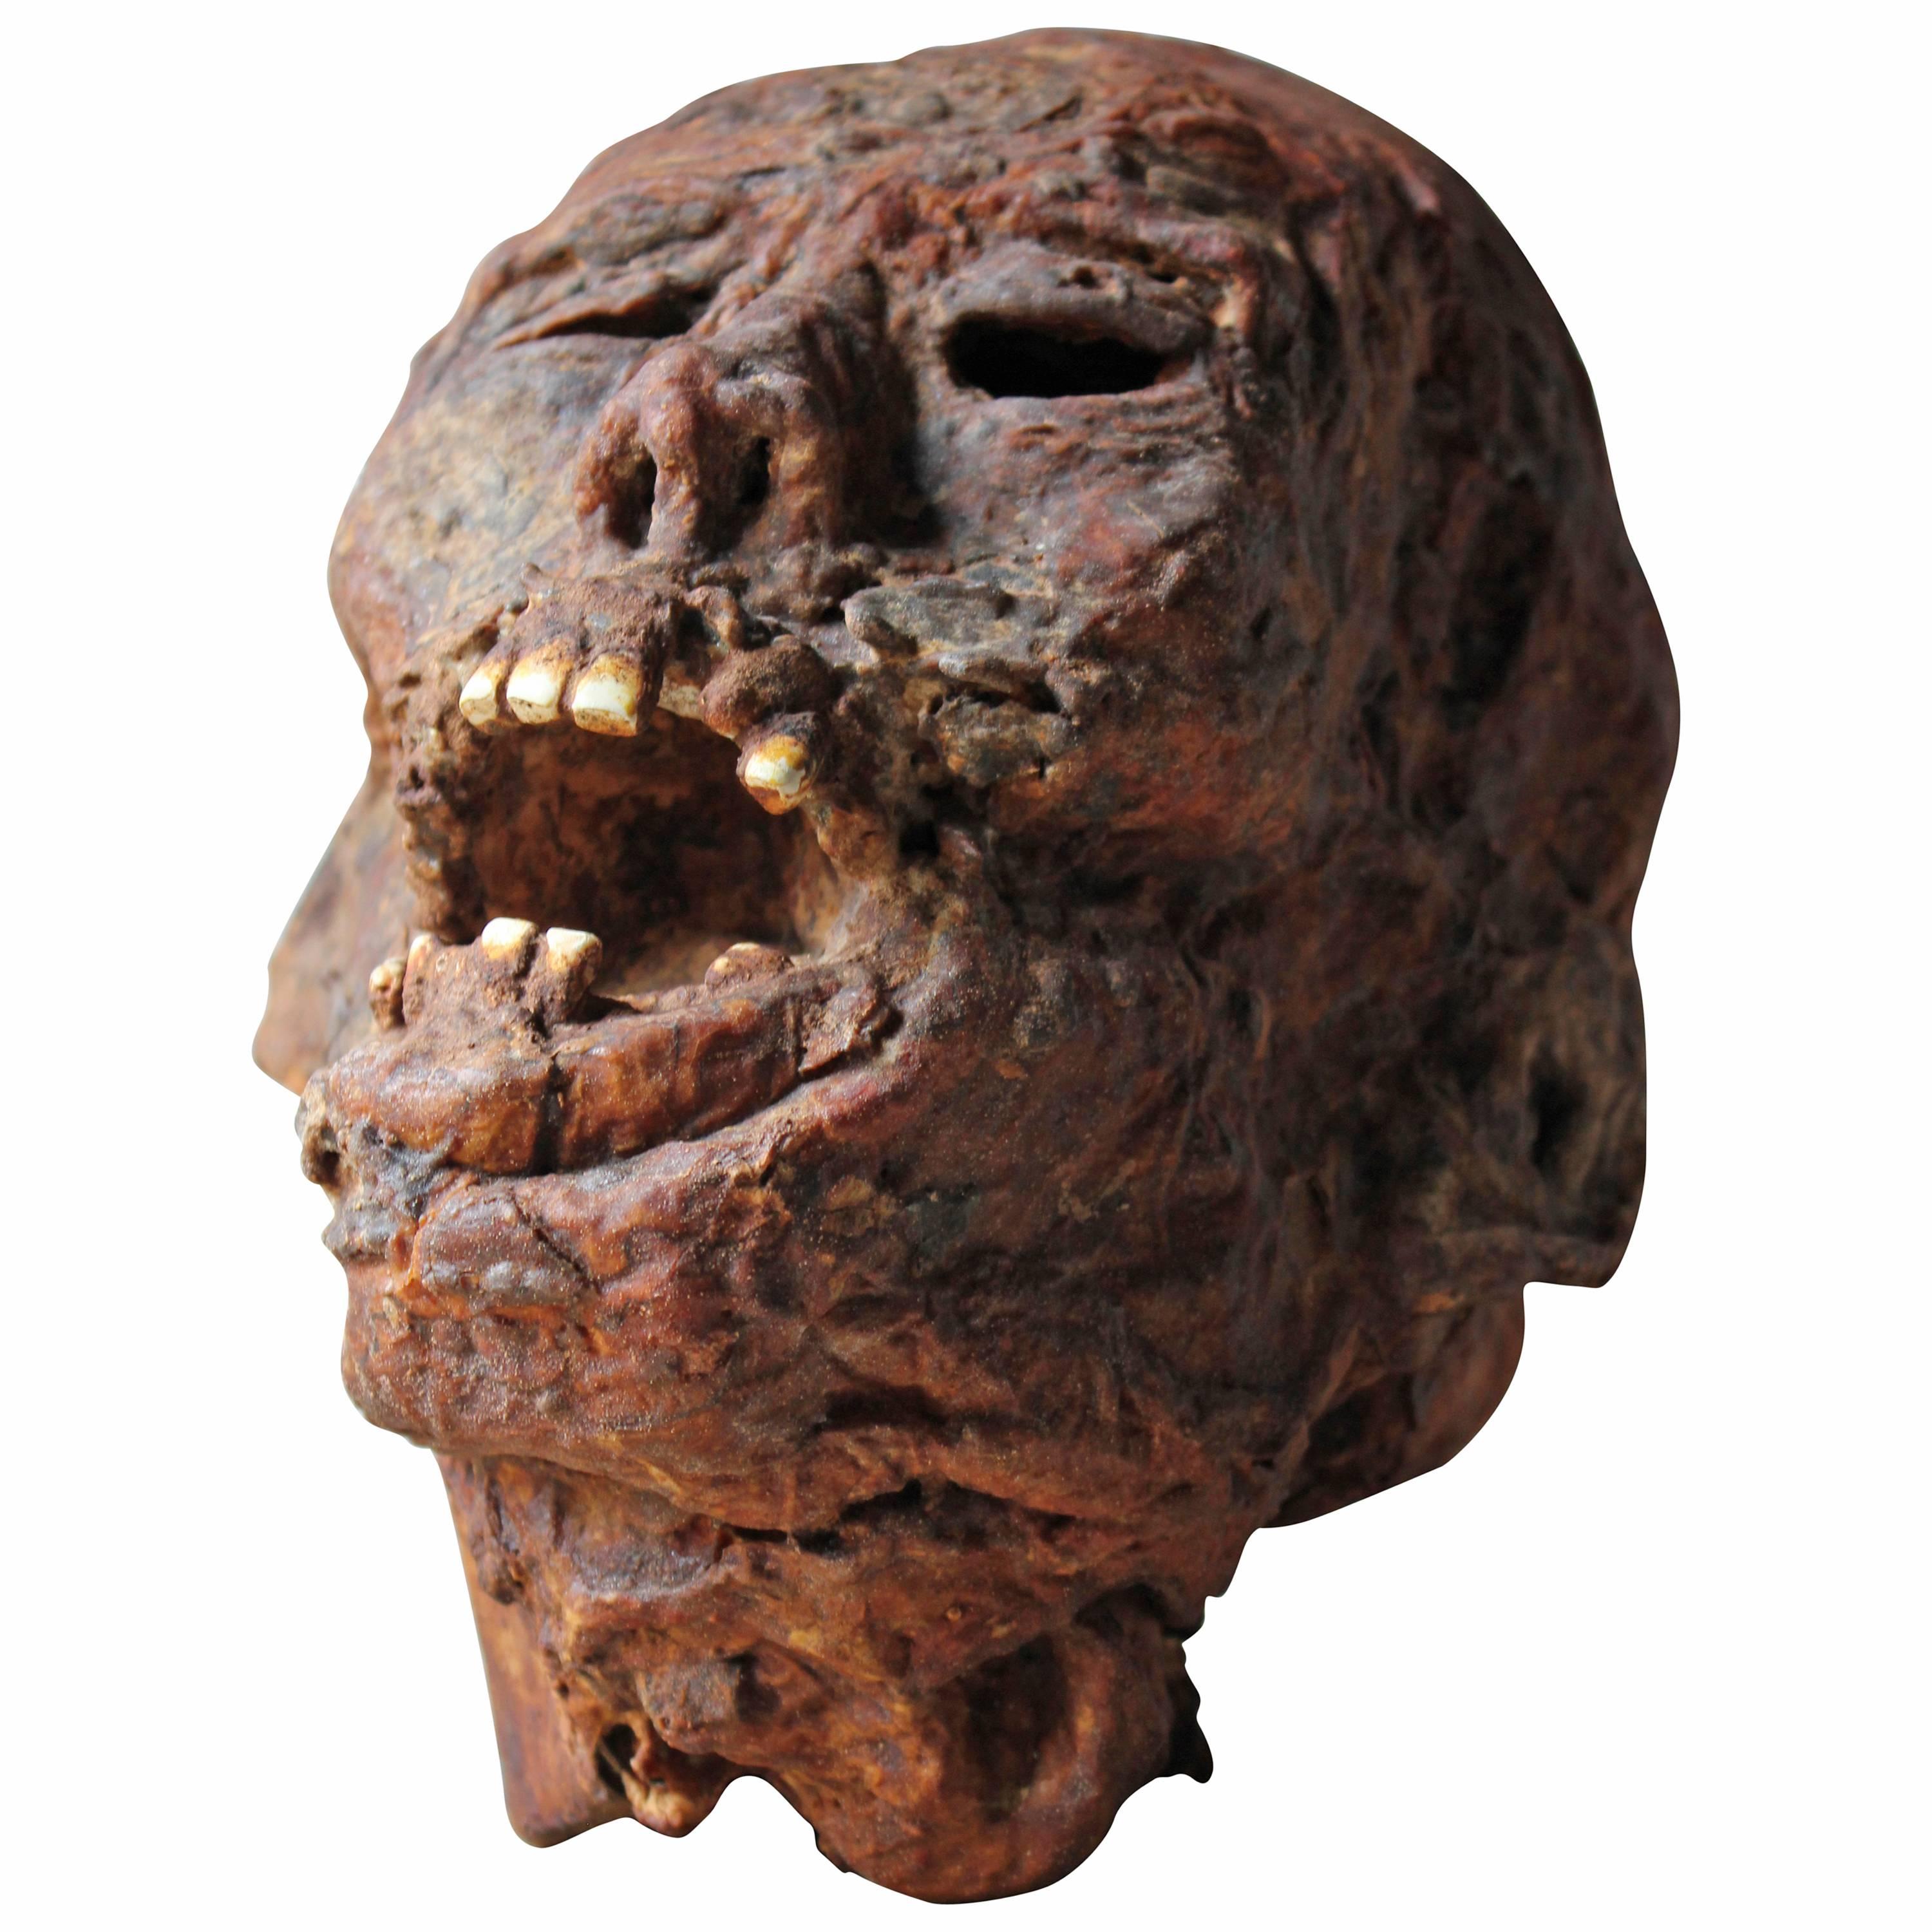 Superbly Modelled Mummified Head Film Prop by Alan Friswell